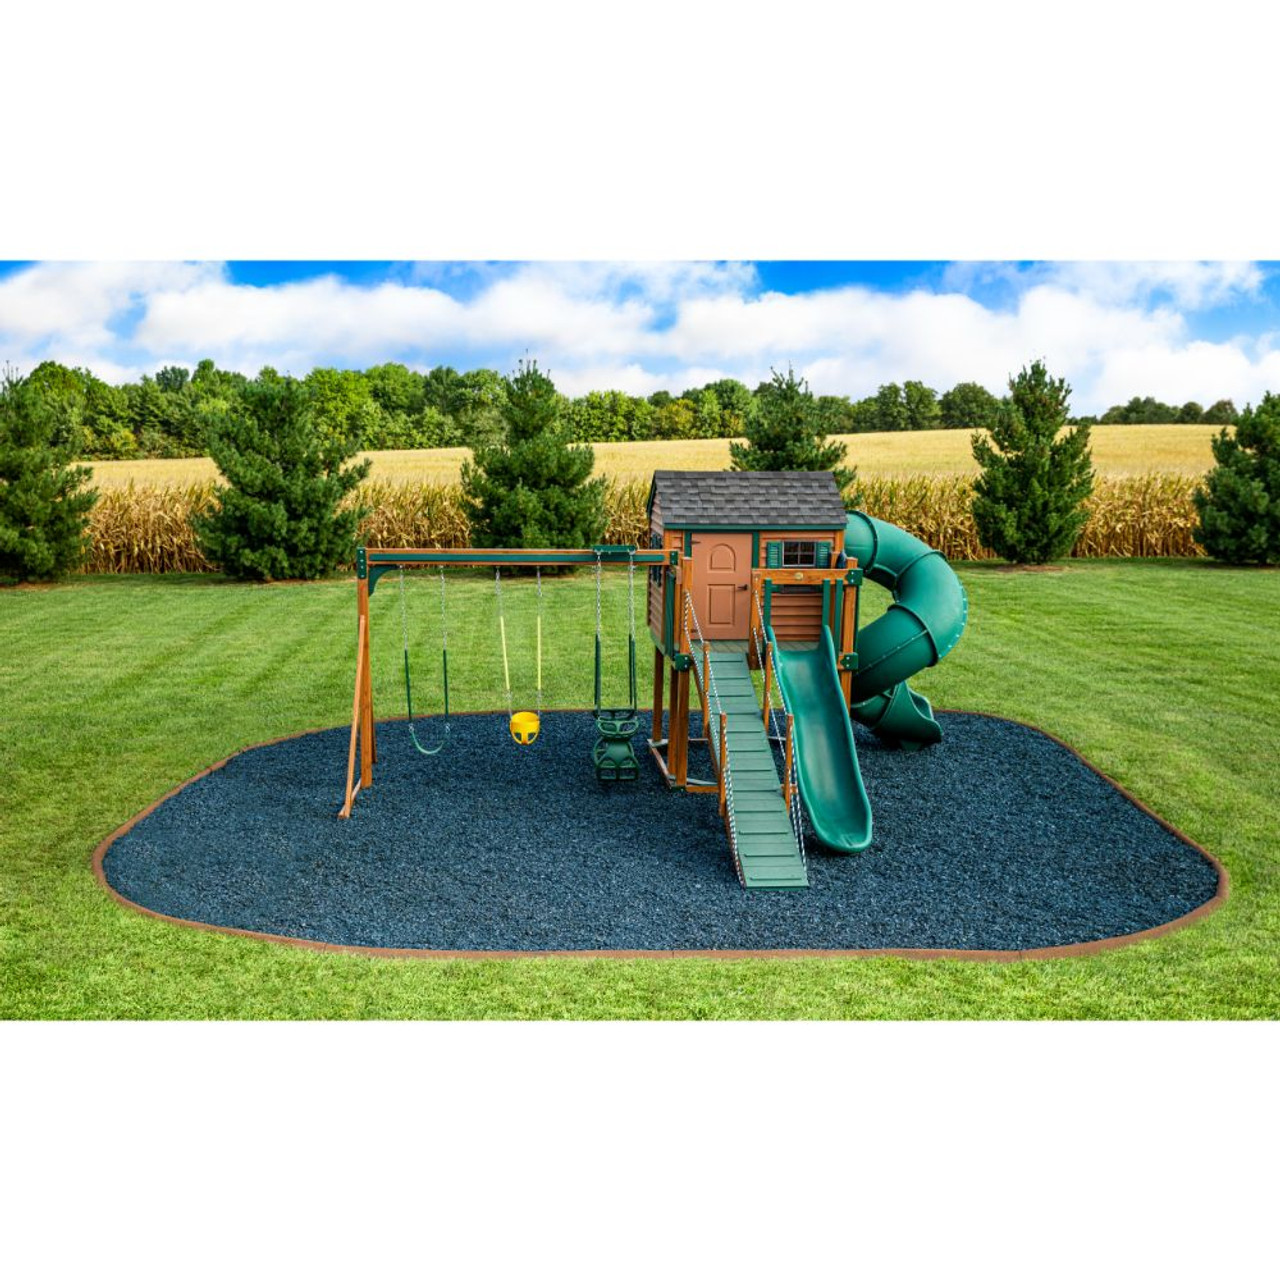 Recycled Rubber Mulch Nuggets - Blue in Use